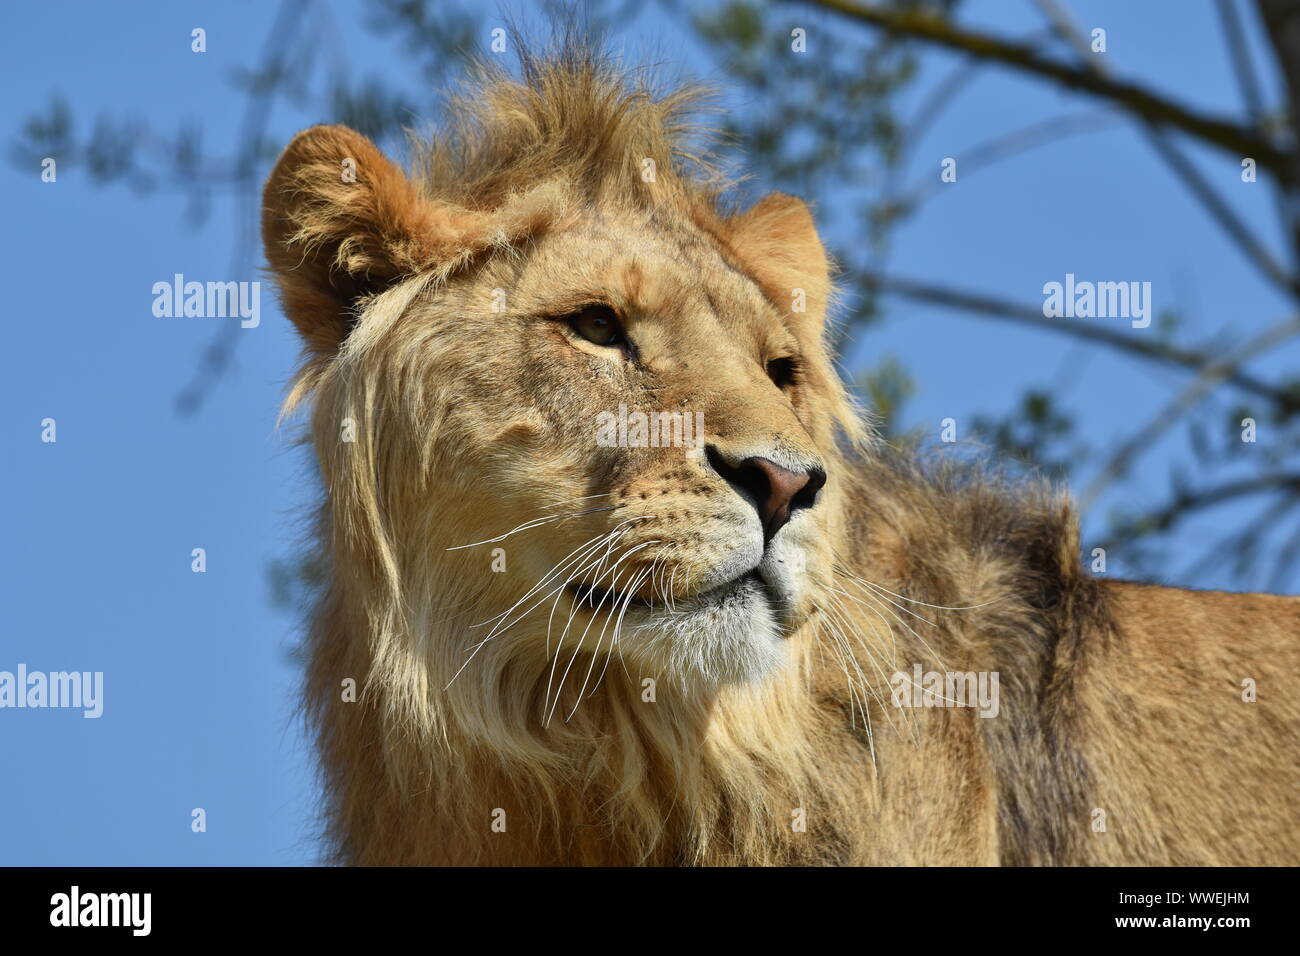 Close up of a young male lion head on blurred blue sky background. Horizontal view Stock Photo